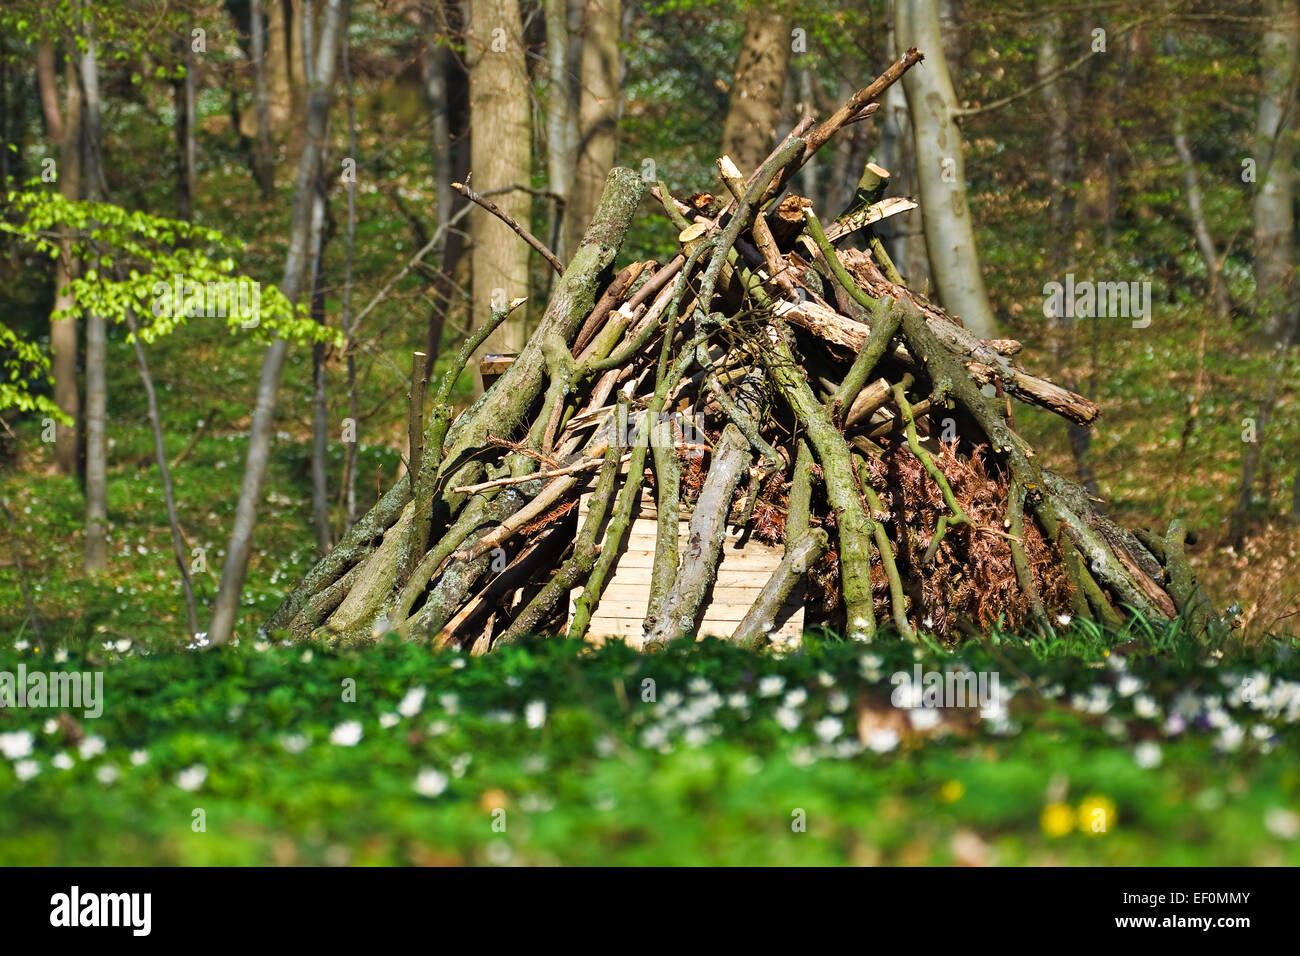 A pile of twigs in the forest. Stock Photo